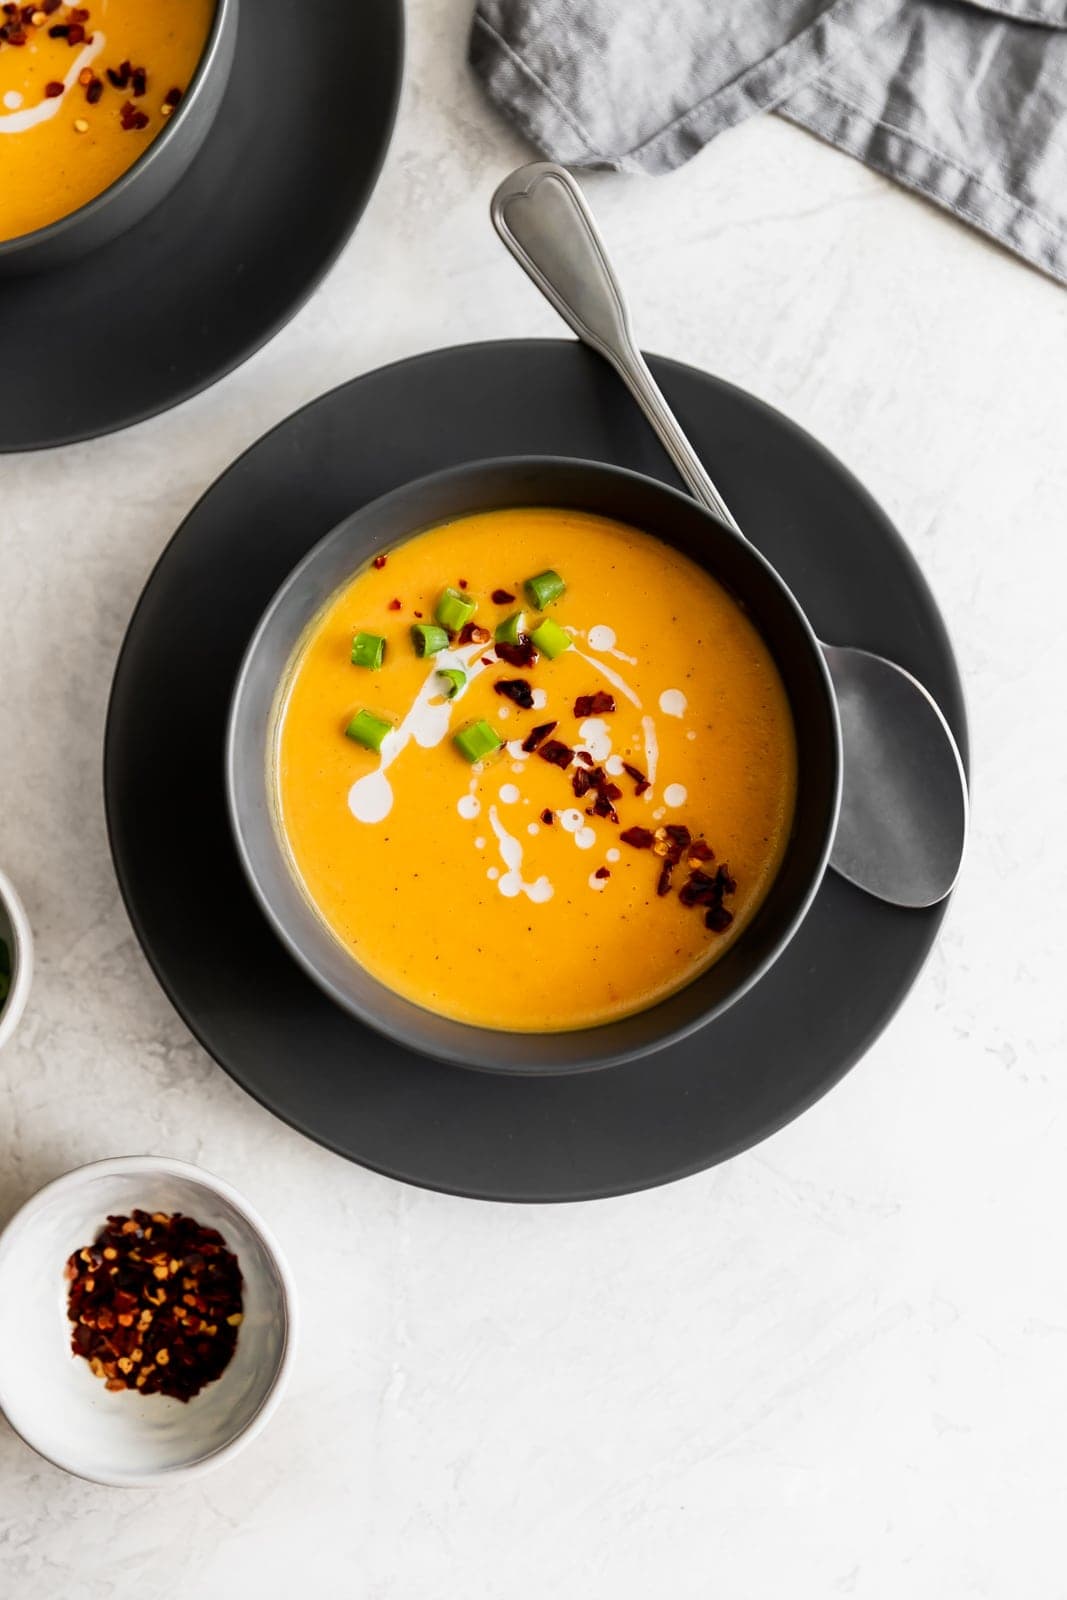 Creamy, dairy-free, and spicy vegan Thai butternut squash soup made with fresh ginger, red curry paste and coconut milk. Ready in 25 minutes!